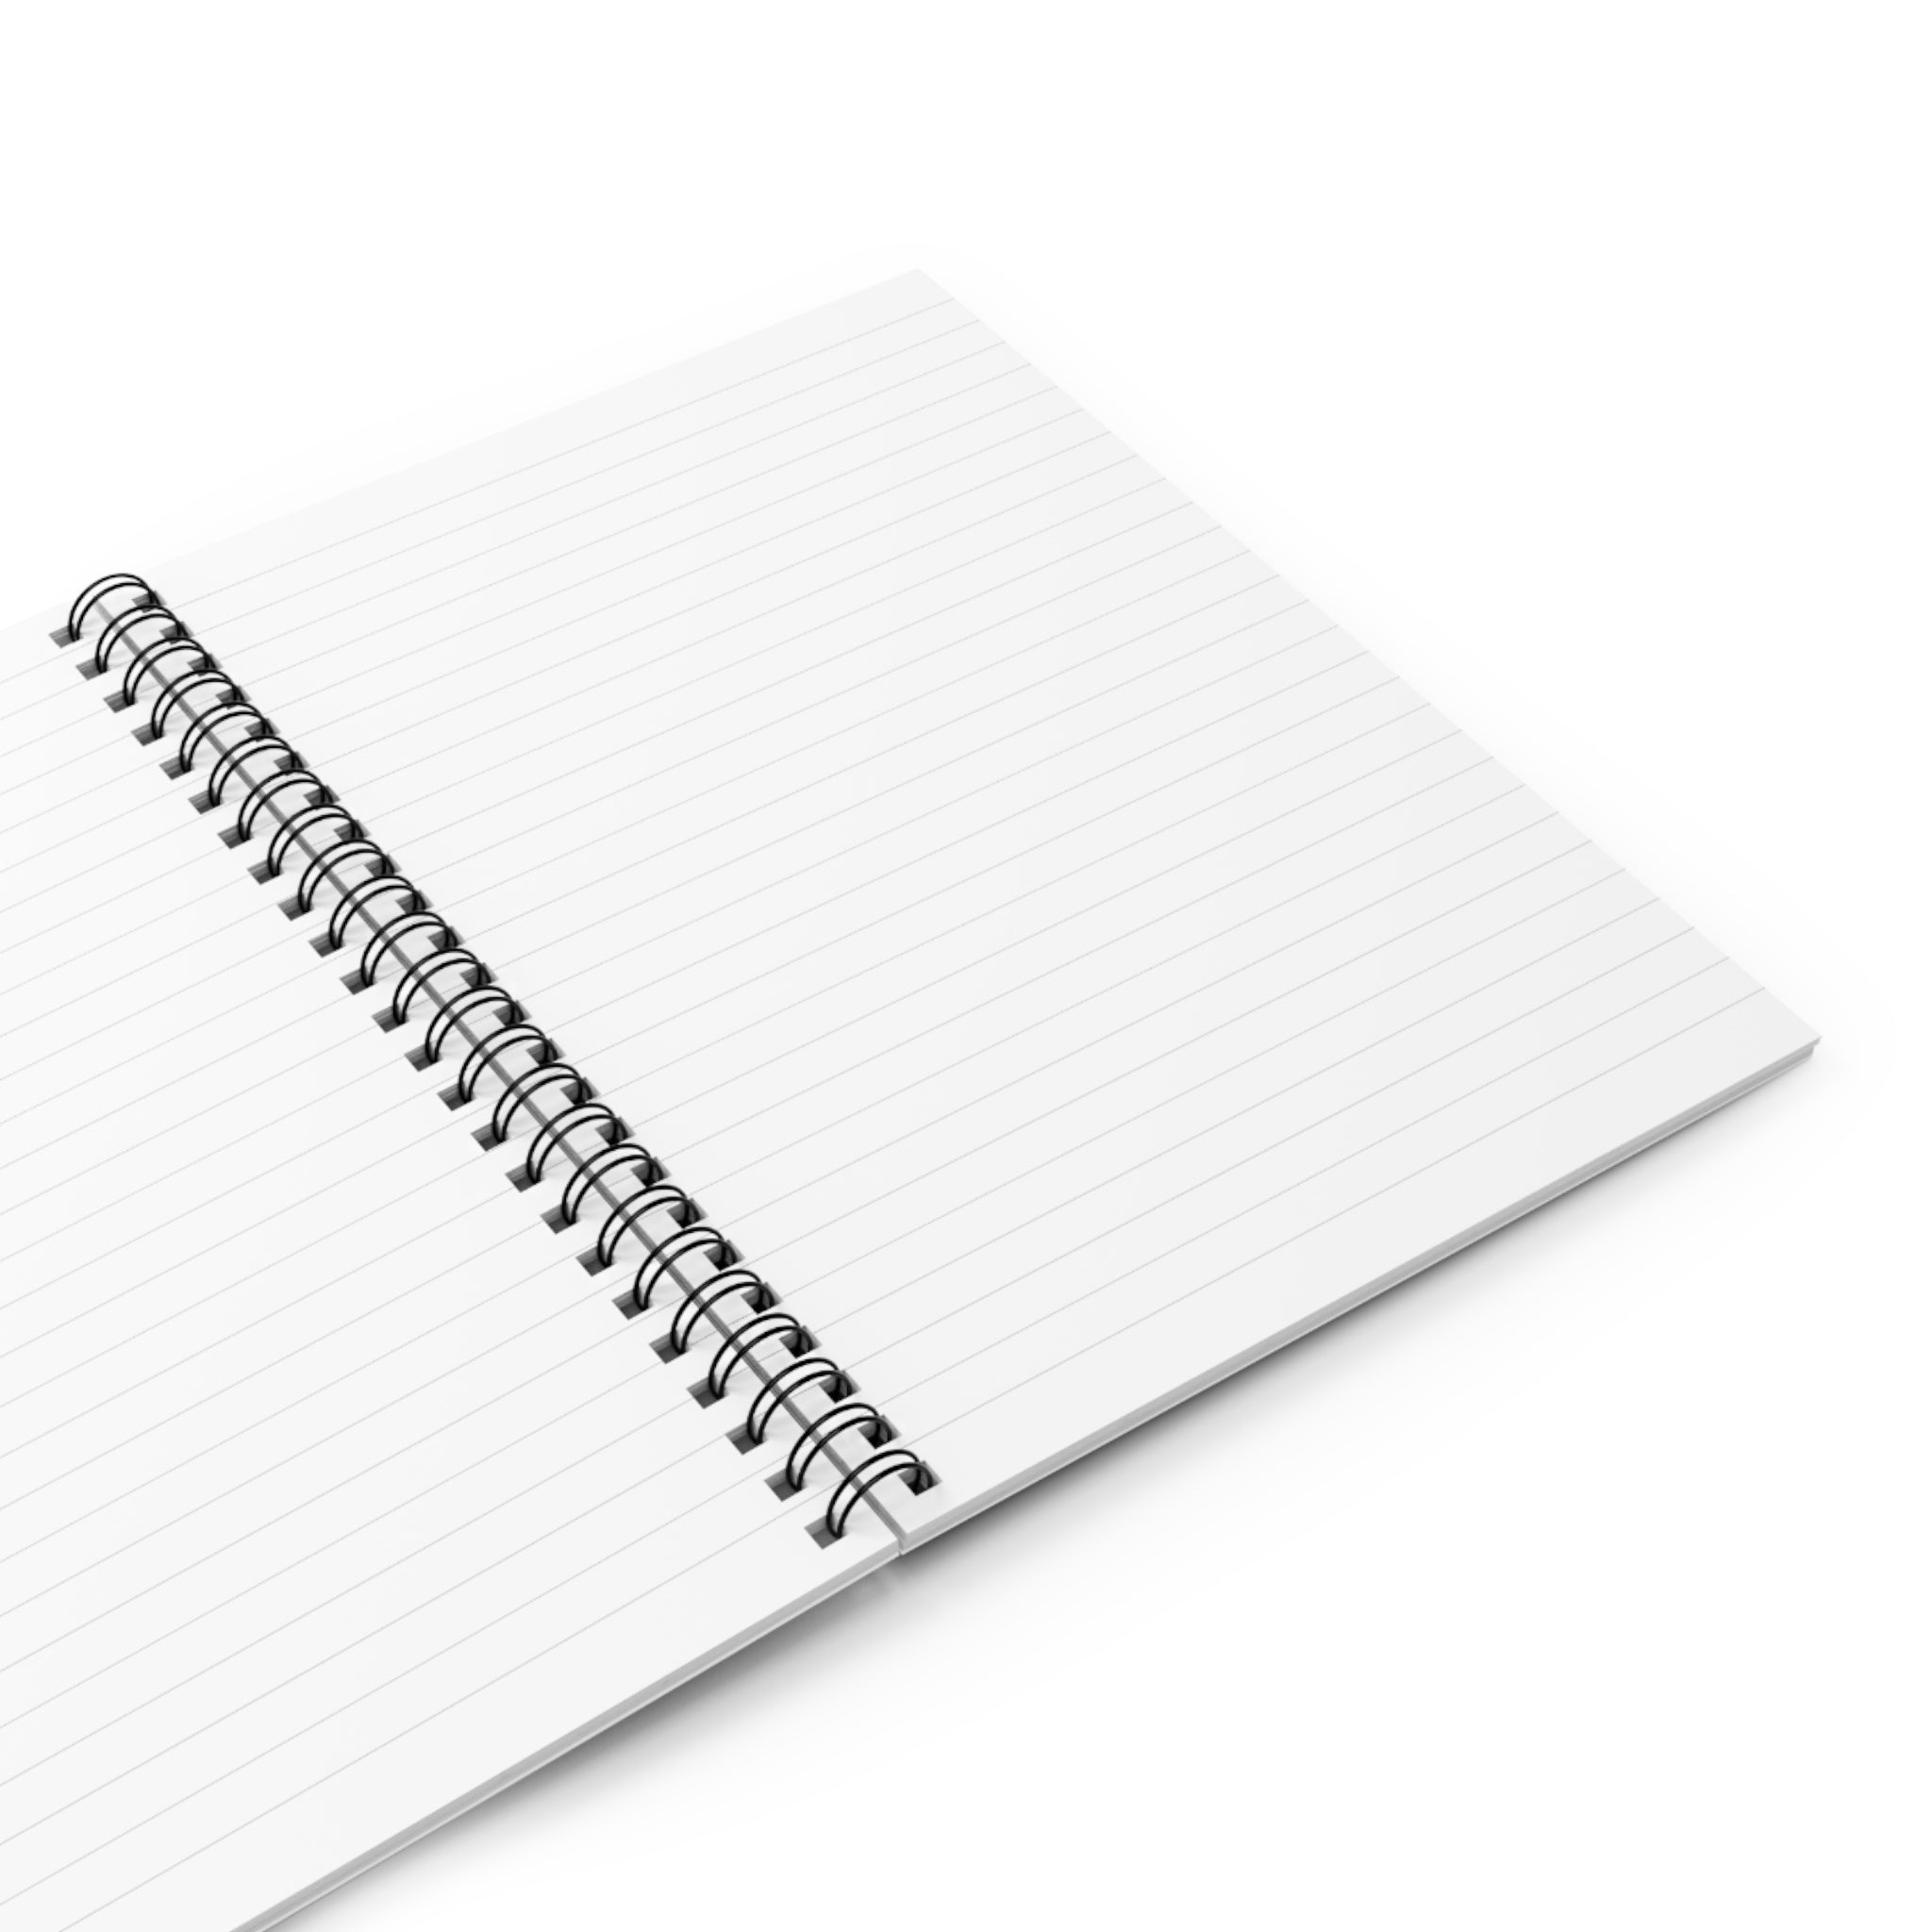 CCC Spiral Notebook - Ruled Line